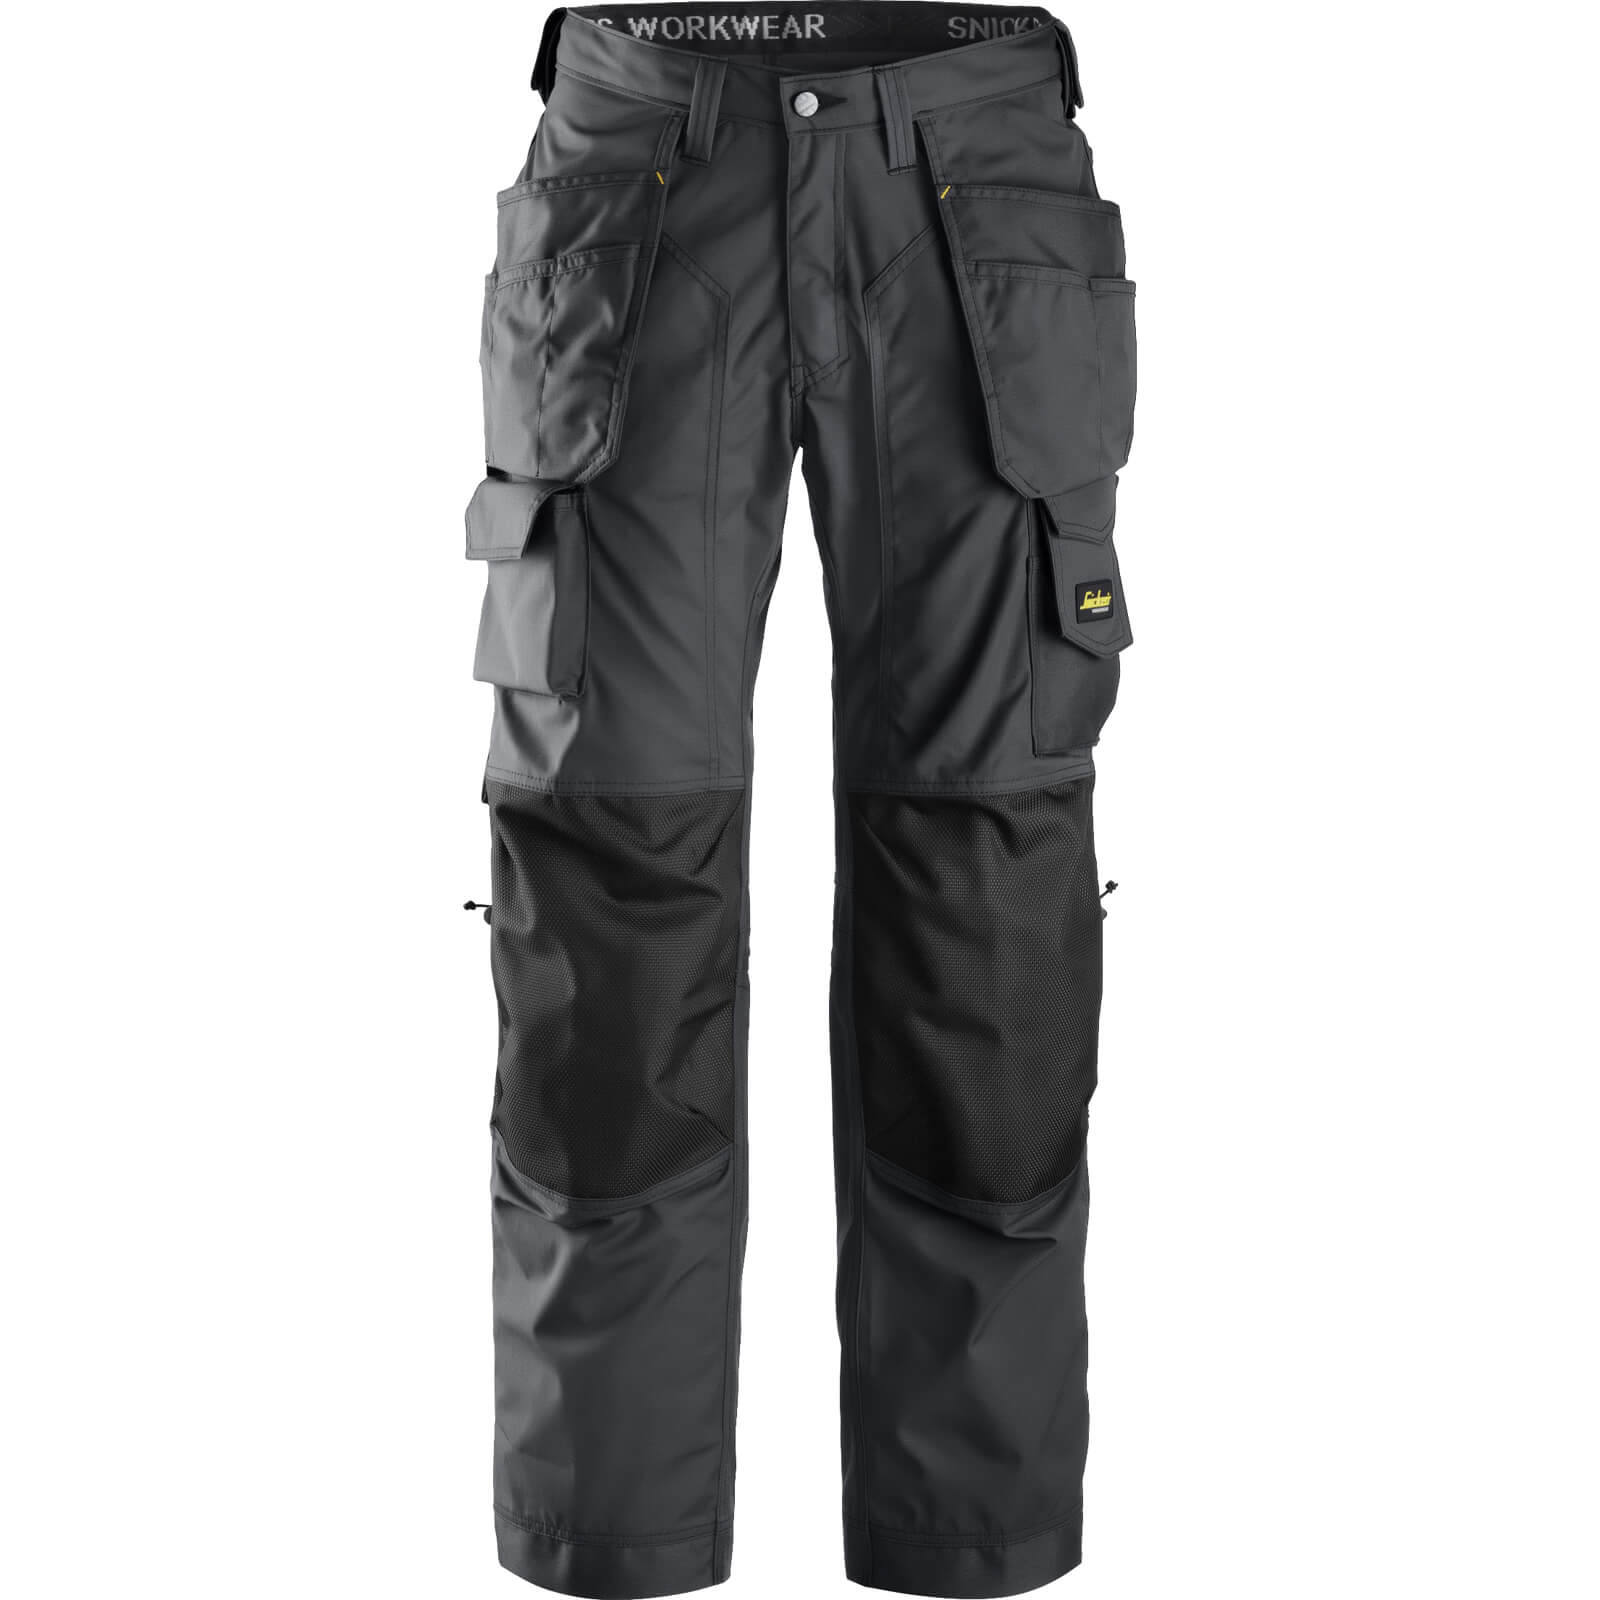 Image of Snickers 3223 Mens Rip Stop Floor Layer Work Trousers Black / Grey 33" 32"